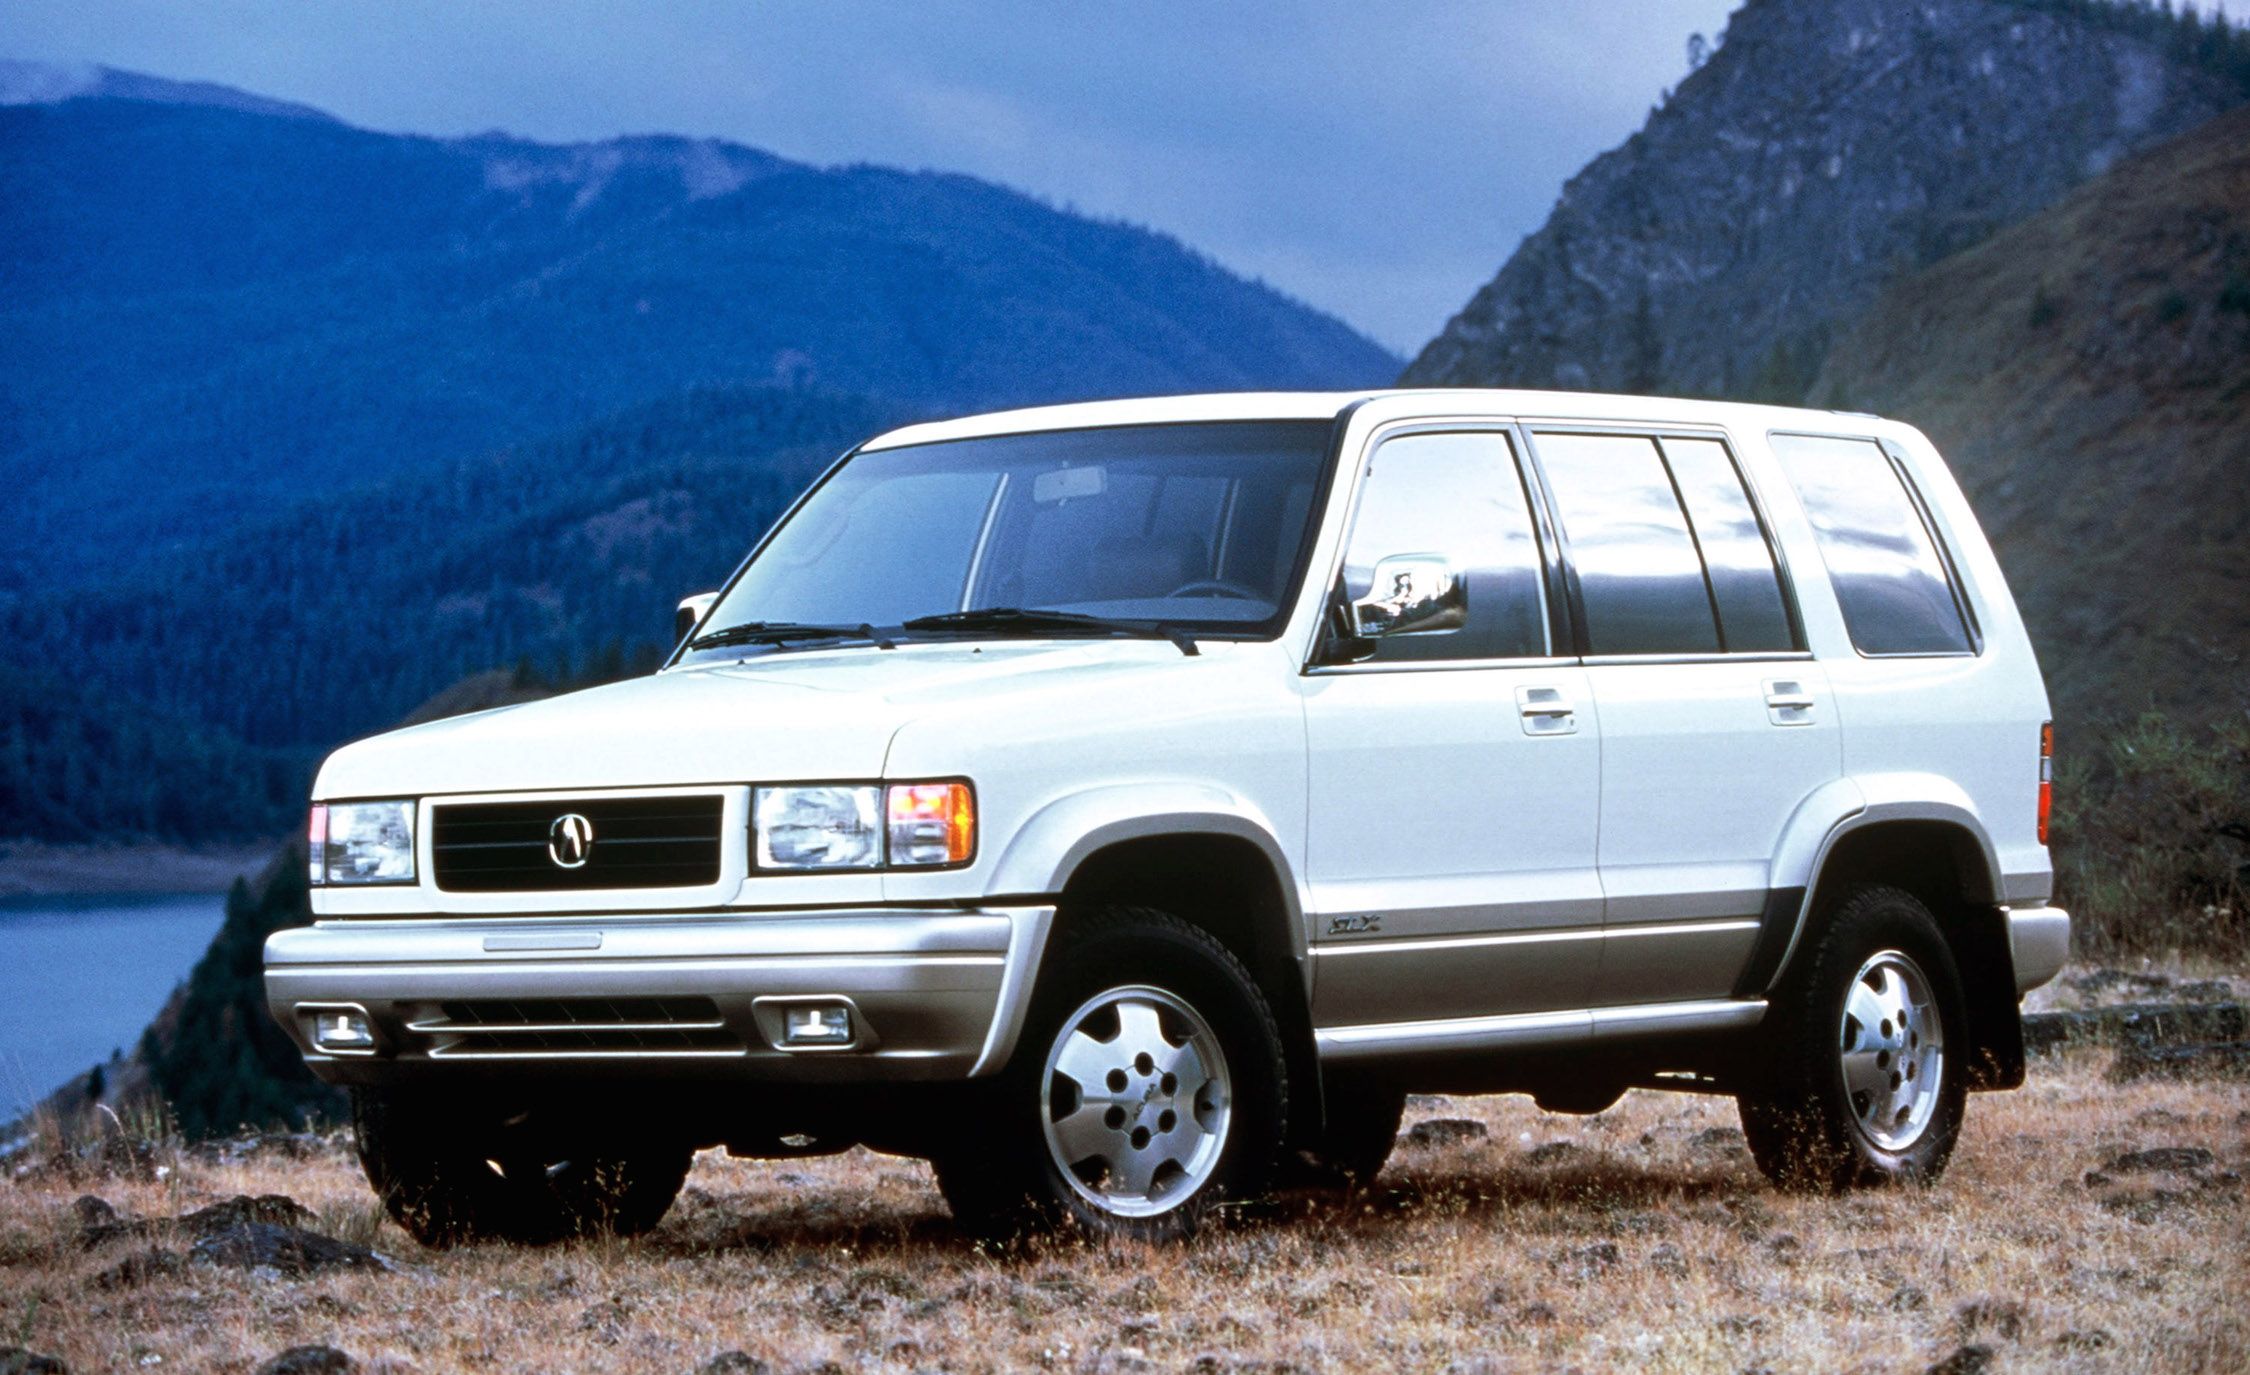 Gone without a Trace: These Are the Forgotten SUVs